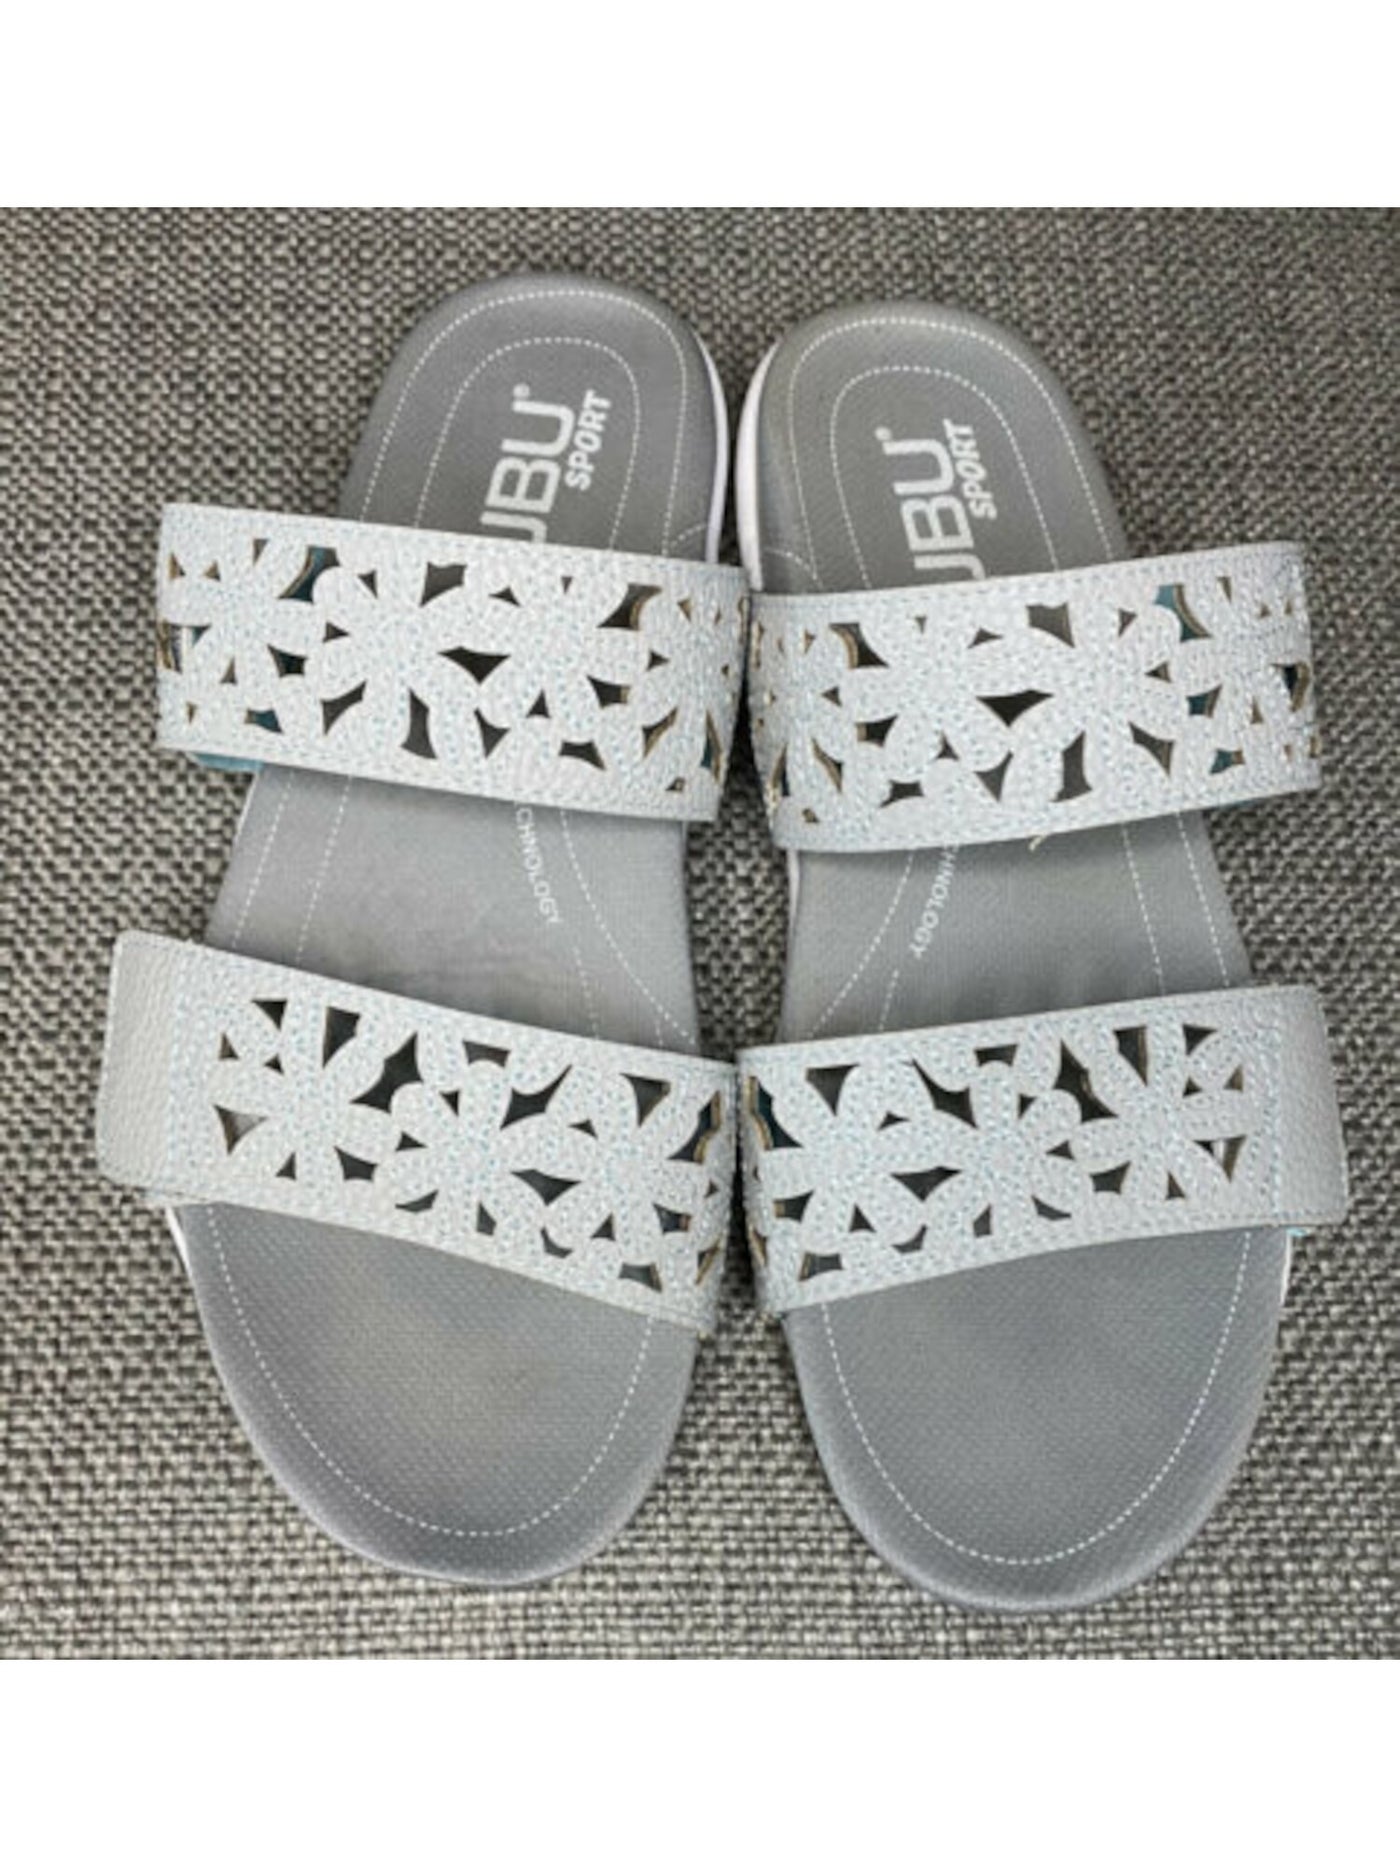 JBU SPORT Womens Gray Floral Two Strapped Perforated Non-Slip Padded Wildflower Round Toe Wedge Slide Sandals Shoes 7 M